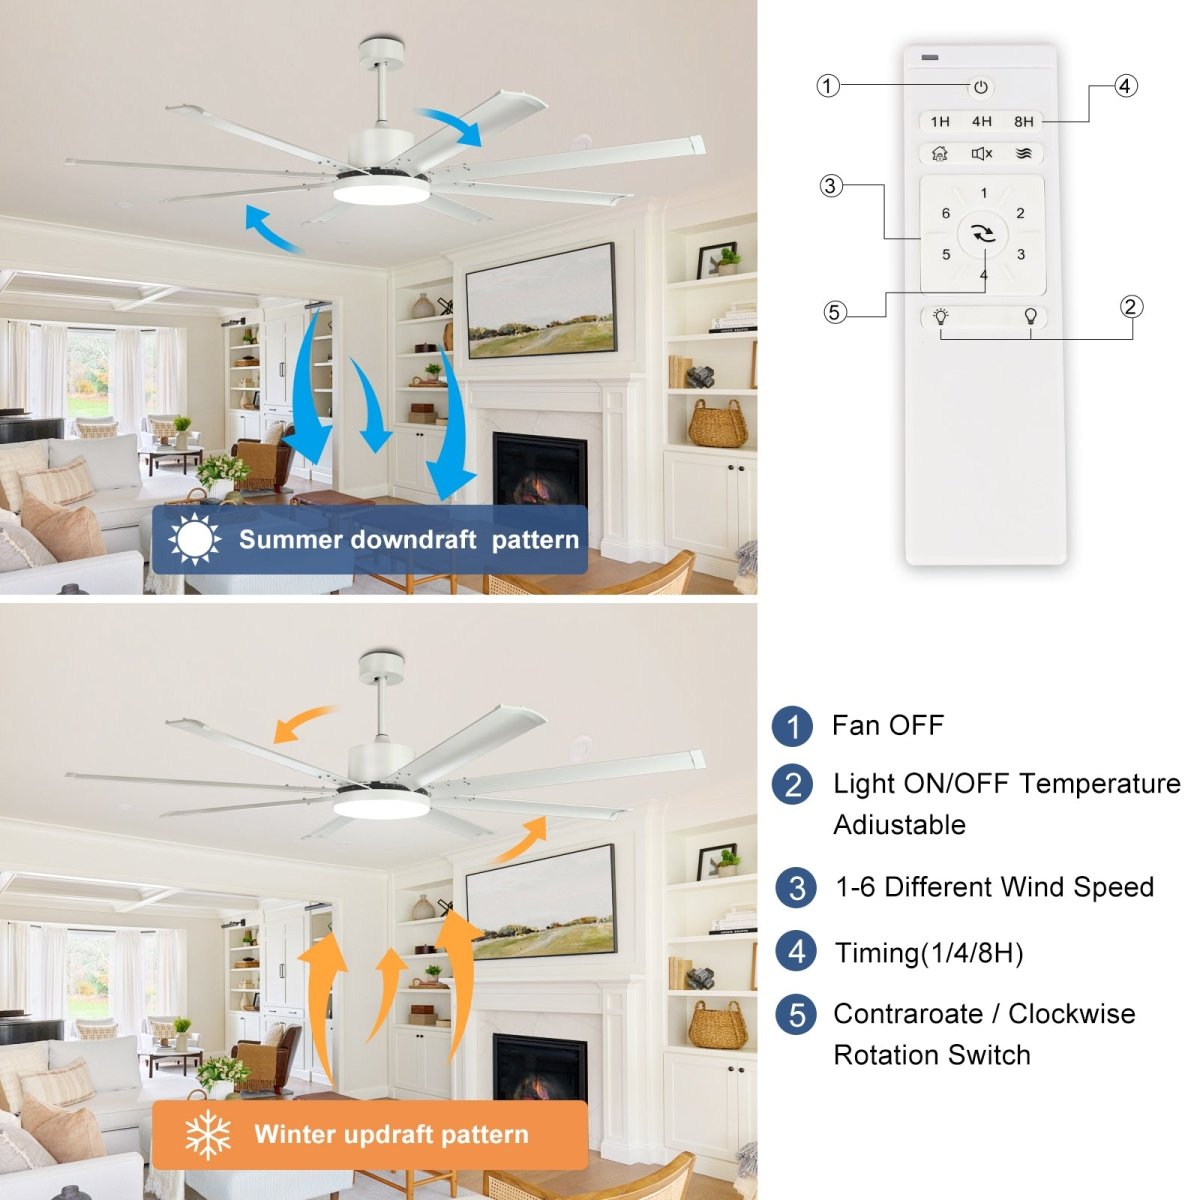 72 Inch Ceiling Fans with Lights and Remote, White Large Ceiling Fan, 6-Speed 8 Aluminum Reversible Blades DC Motor, Industrial Ceiling Fan for Kitchen Living Room Playroom Indoor/Outdoor - WS-FPZ57-24C-8-W 2 | DEPULEY